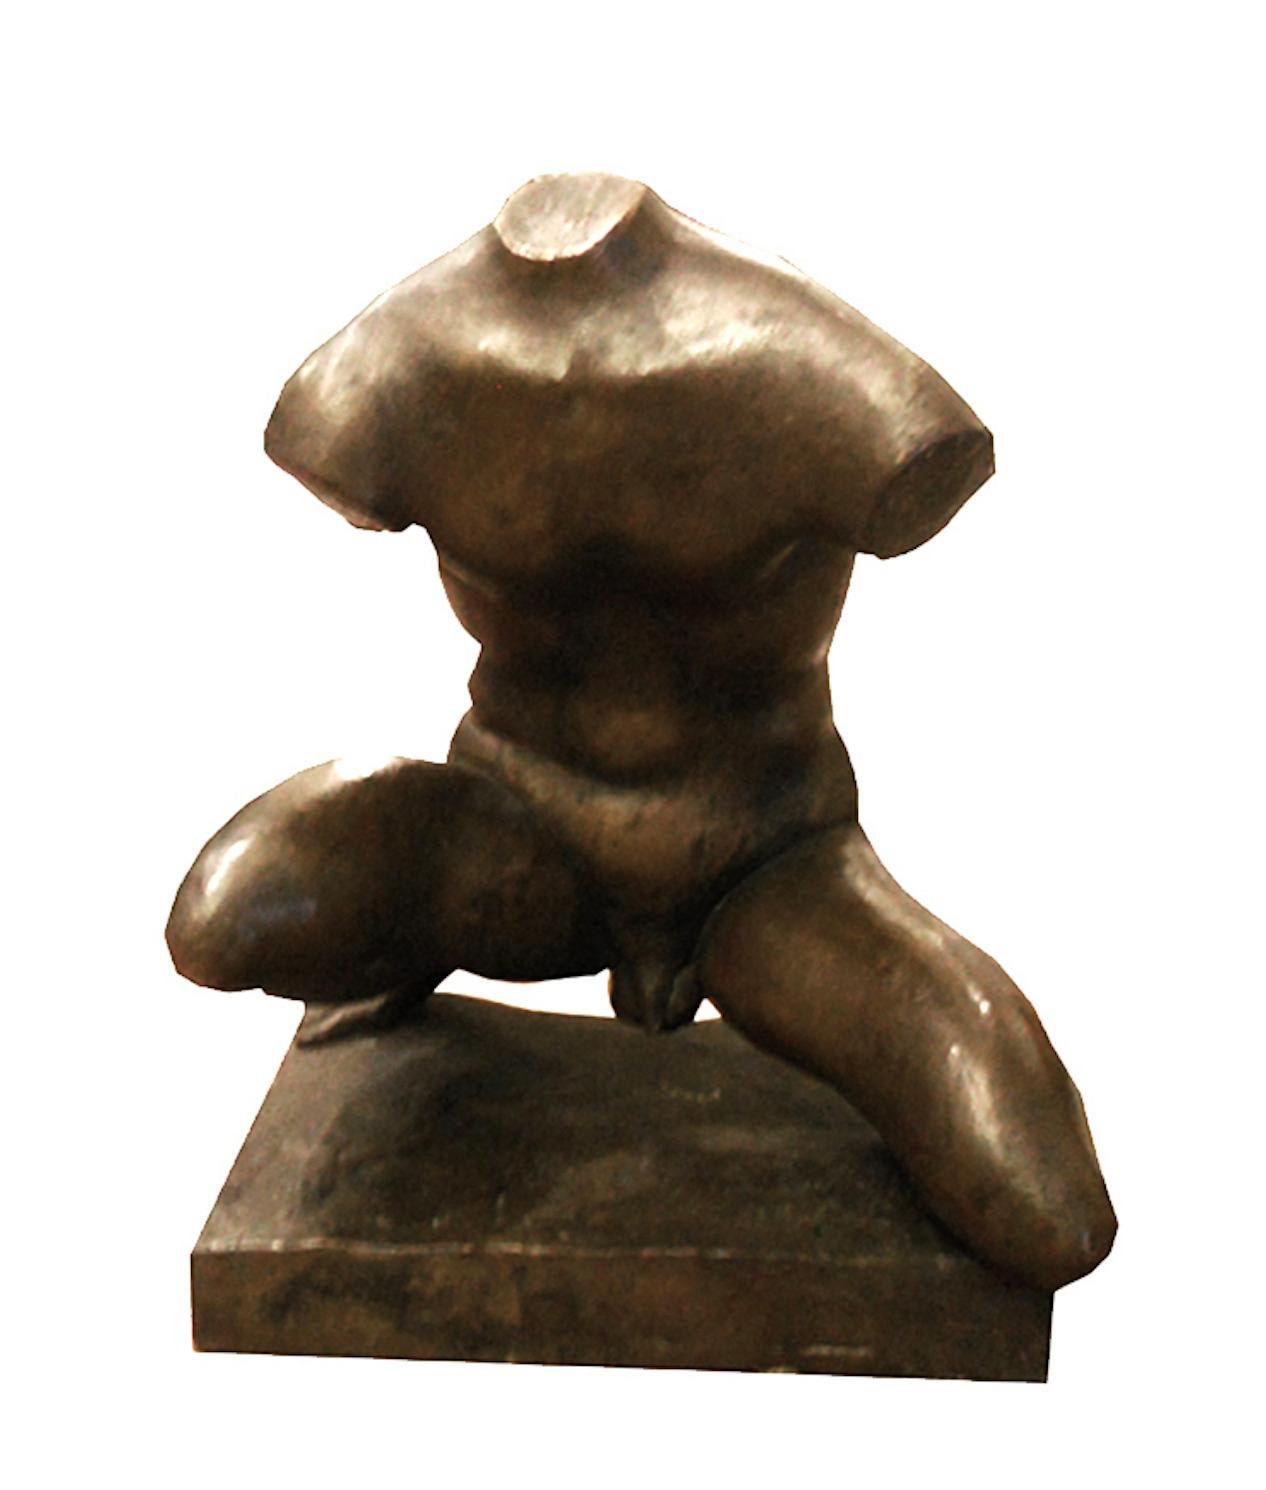 This bust is very interested for the dimension.
BRONZE SCULPTUR DEPICTING A BUST OF A BOY (1964).
WORK OF CARLO CANESTRARI (SASSOFERRATO 1922 - ROME 1988).
It is published on: 